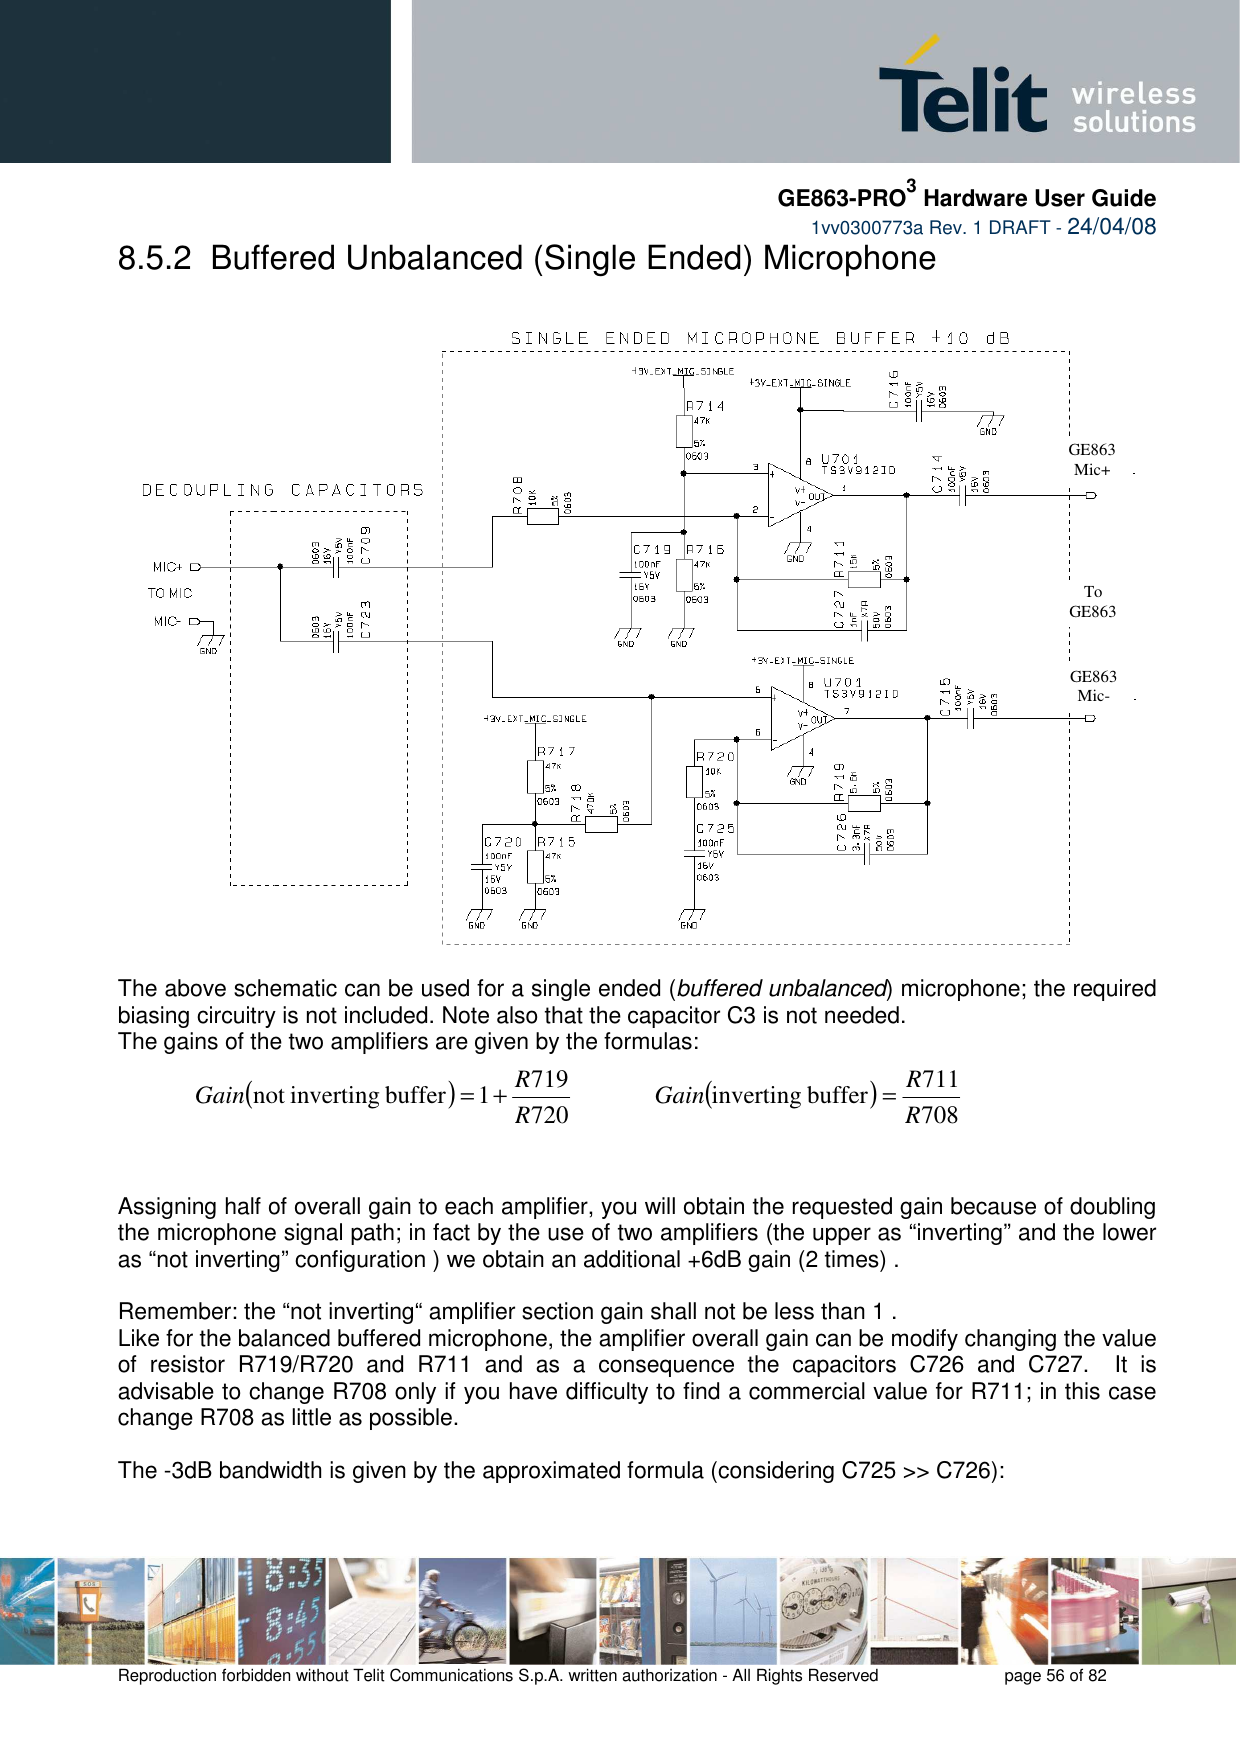     GE863-PRO3 Hardware User Guide  1vv0300773a Rev. 1 DRAFT - 24/04/08    Reproduction forbidden without Telit Communications S.p.A. written authorization - All Rights Reserved    page 56 of 82  8.5.2  Buffered Unbalanced (Single Ended) Microphone    The above schematic can be used for a single ended (buffered unbalanced) microphone; the required biasing circuitry is not included. Note also that the capacitor C3 is not needed. The gains of the two amplifiers are given by the formulas:  ( )7207191buffer invertingnot RRGain +=            ( )708711buffer invertingRRGain =     Assigning half of overall gain to each amplifier, you will obtain the requested gain because of doubling the microphone signal path; in fact by the use of two amplifiers (the upper as “inverting” and the lower as “not inverting” configuration ) we obtain an additional +6dB gain (2 times) .  Remember: the “not inverting“ amplifier section gain shall not be less than 1 .   Like for the balanced buffered microphone, the amplifier overall gain can be modify changing the value of  resistor  R719/R720  and  R711  and  as  a  consequence  the  capacitors  C726  and  C727.    It  is advisable to change R708 only if you have difficulty to find a commercial value for R711; in this case change R708 as little as possible.    The -3dB bandwidth is given by the approximated formula (considering C725 &gt;&gt; C726): 2,7nF  6,8nF  To GE863 GE863 Mic+ GE863 Mic- 